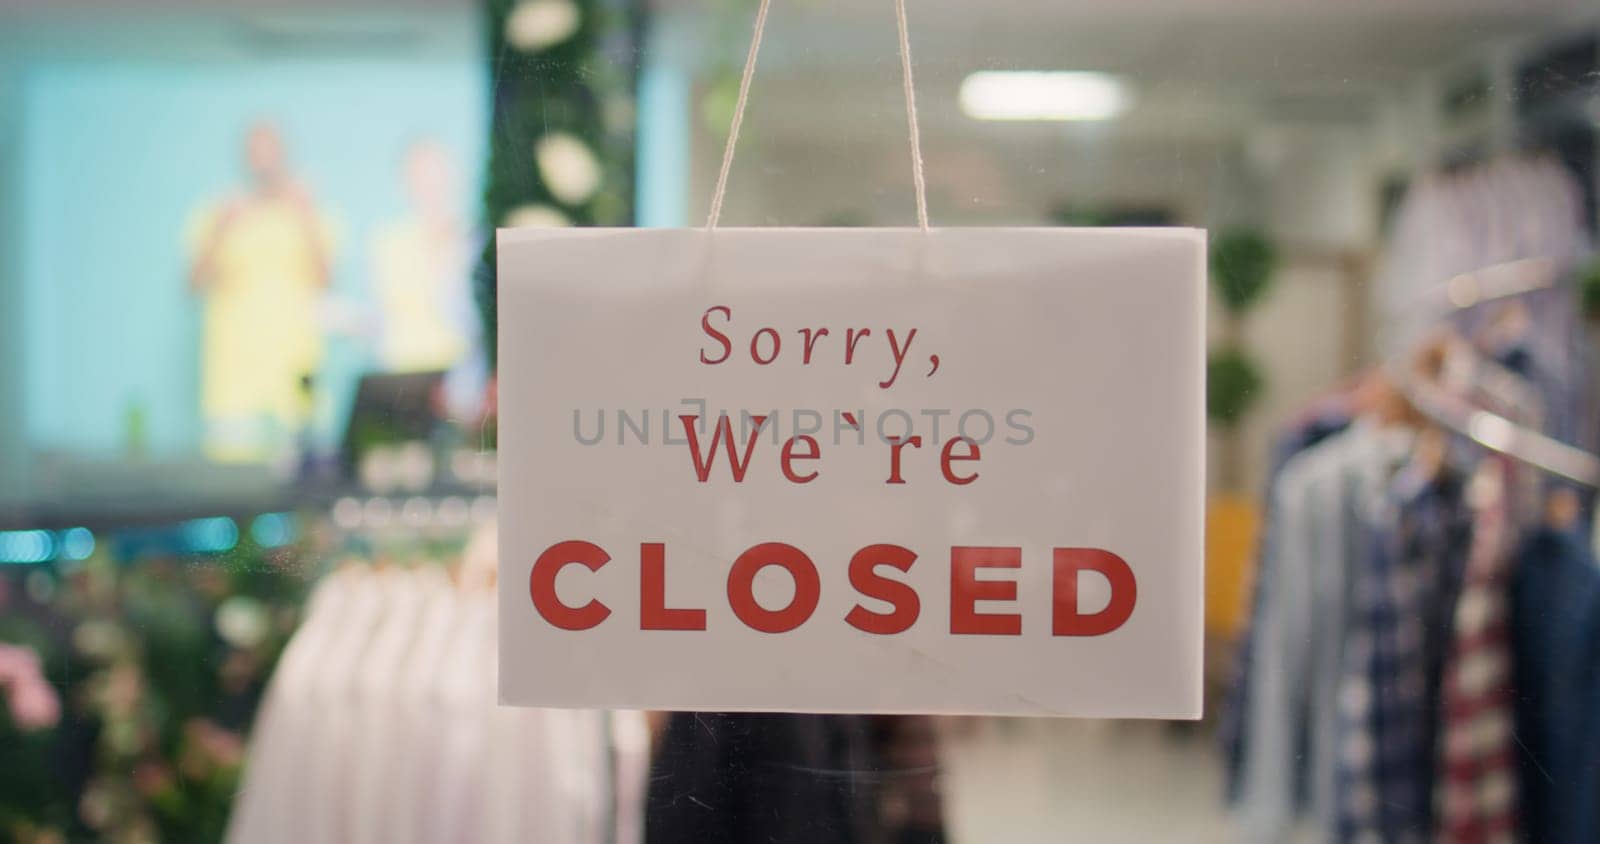 Closed message on clothing store door by DCStudio